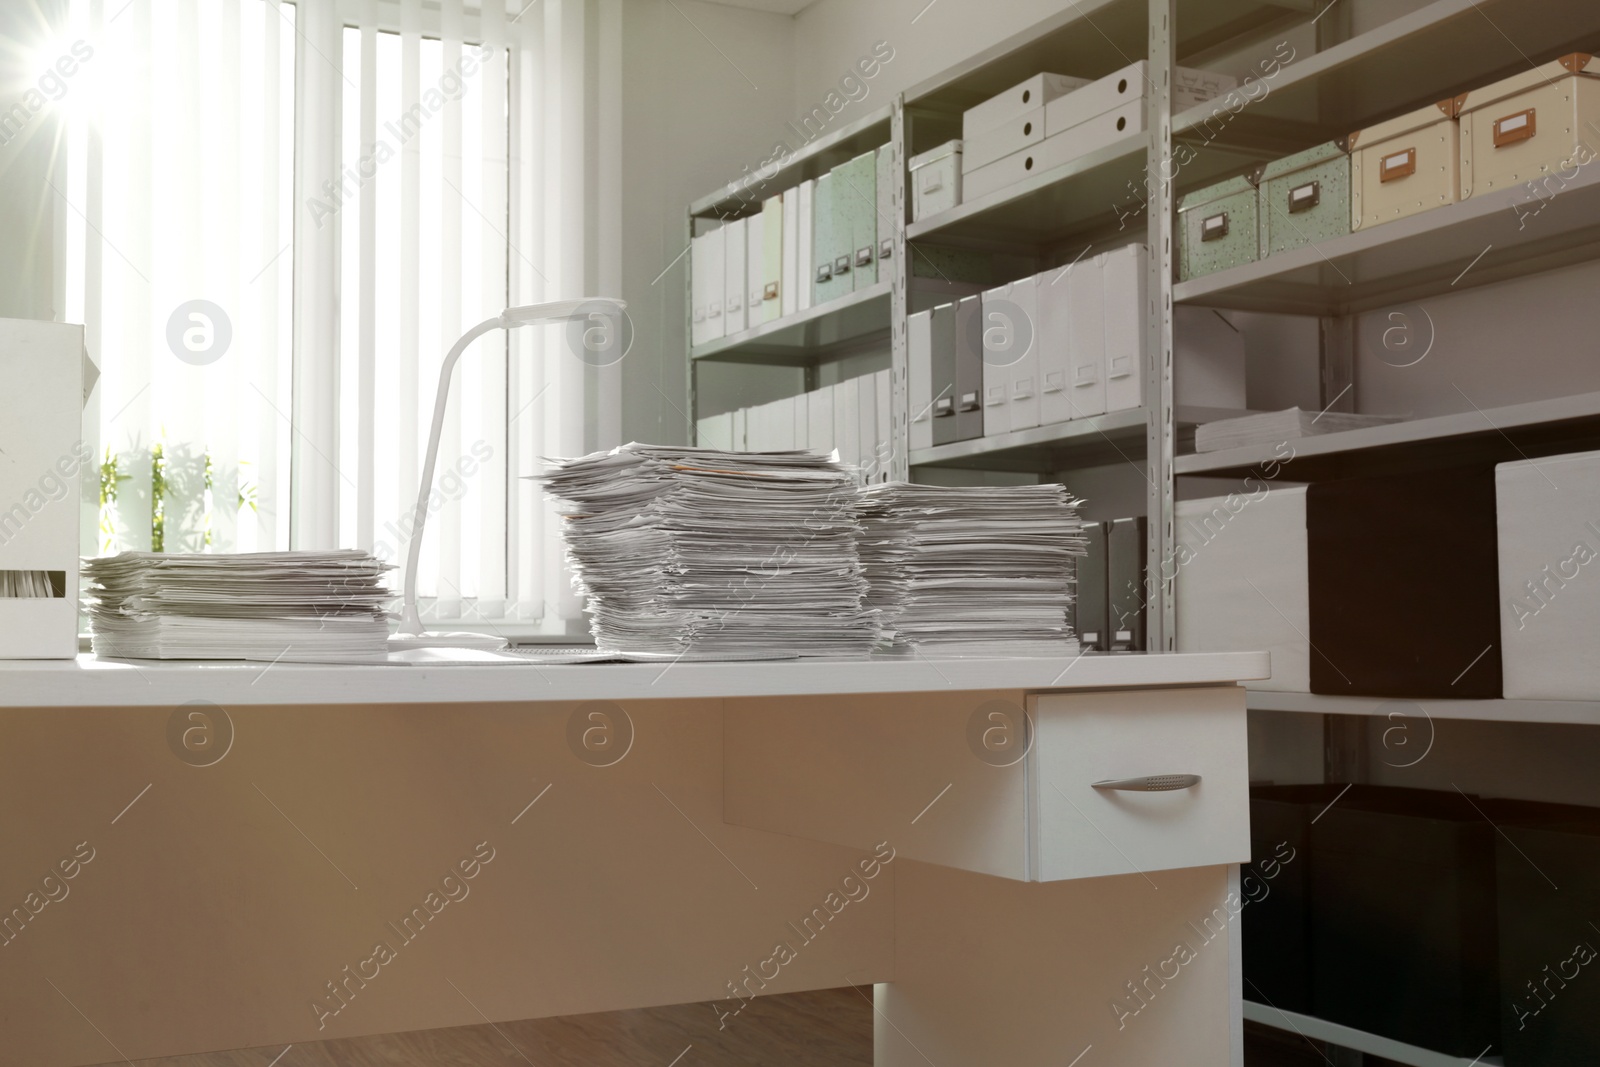 Photo of Stacks of documents on table in office